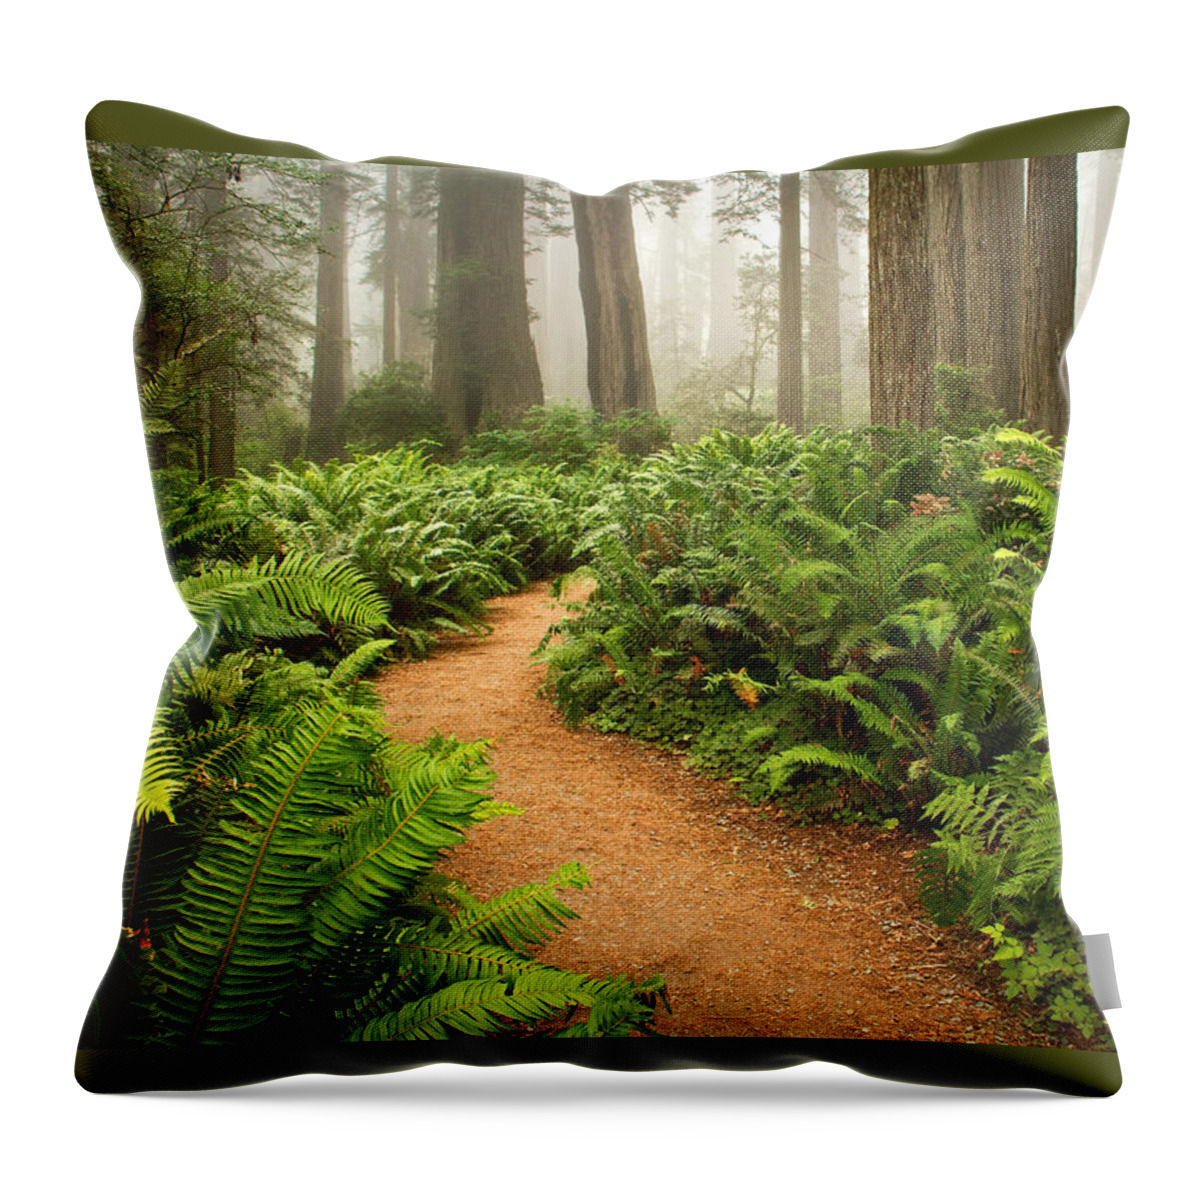 California Throw Pillow featuring the photograph Timeless by Alice Cahill